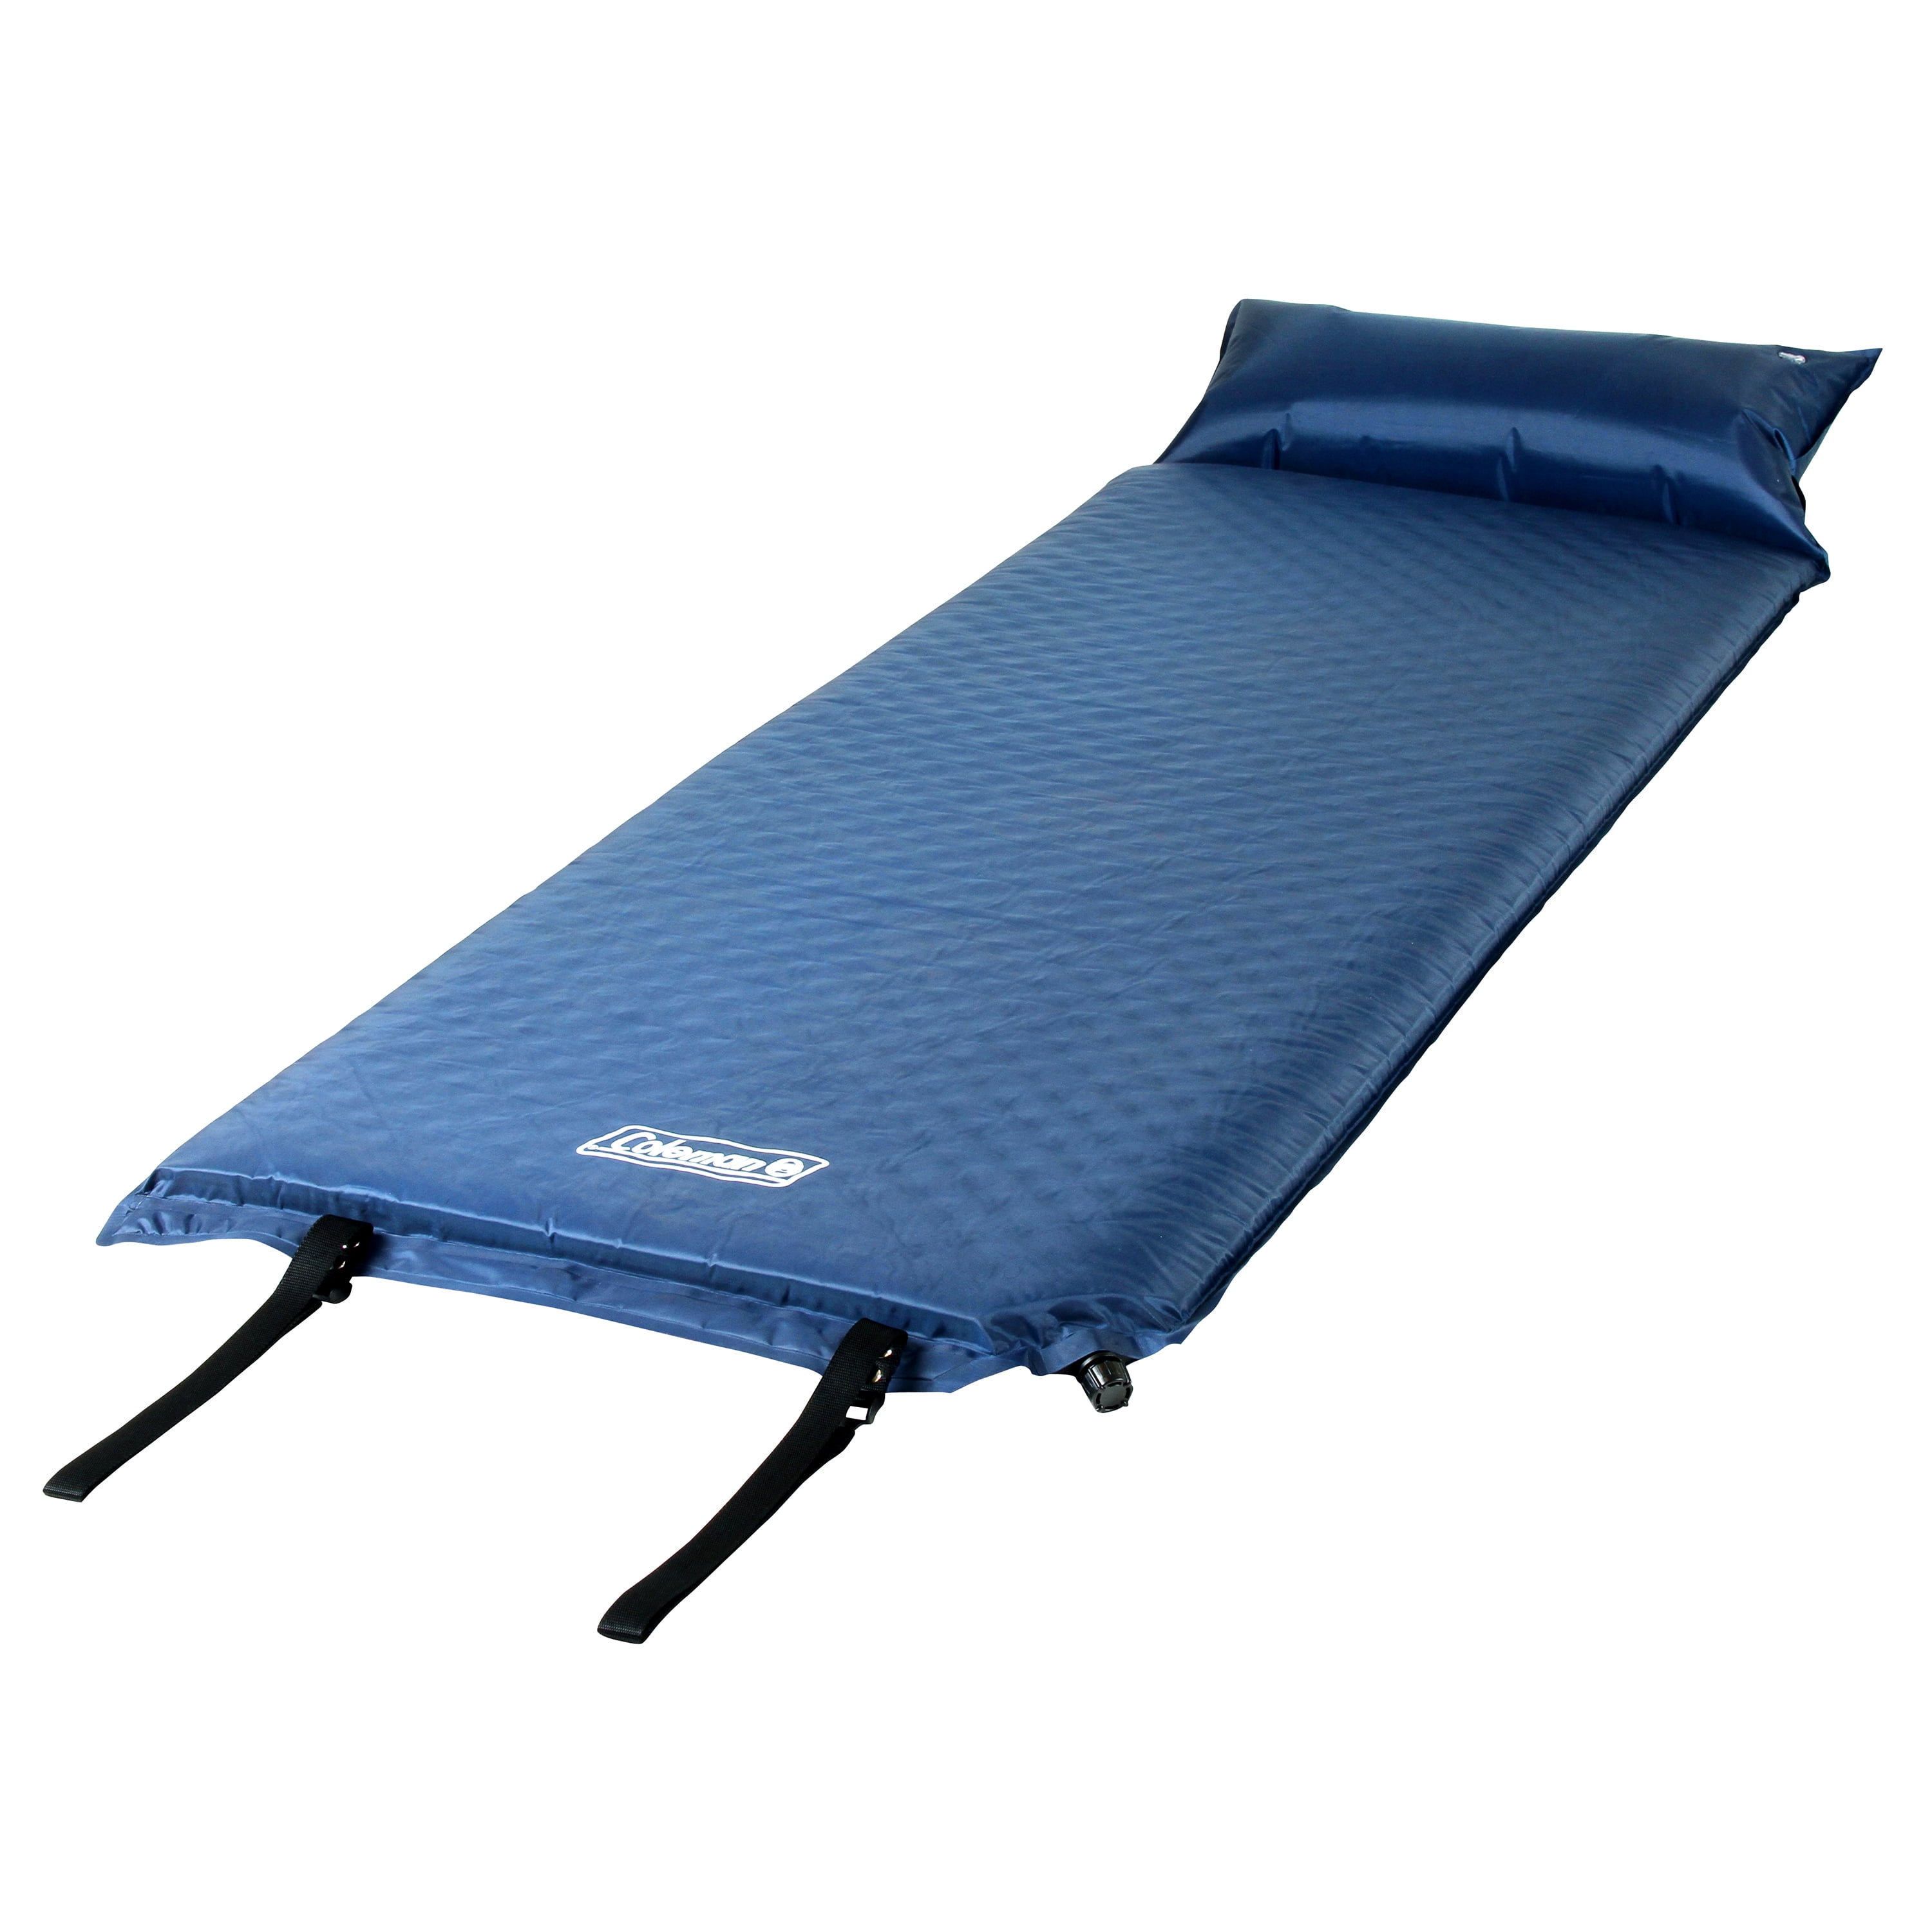 KOOLSEN Self-Inflating Sleeping pad for Backpacking Camping pad with Pillow 